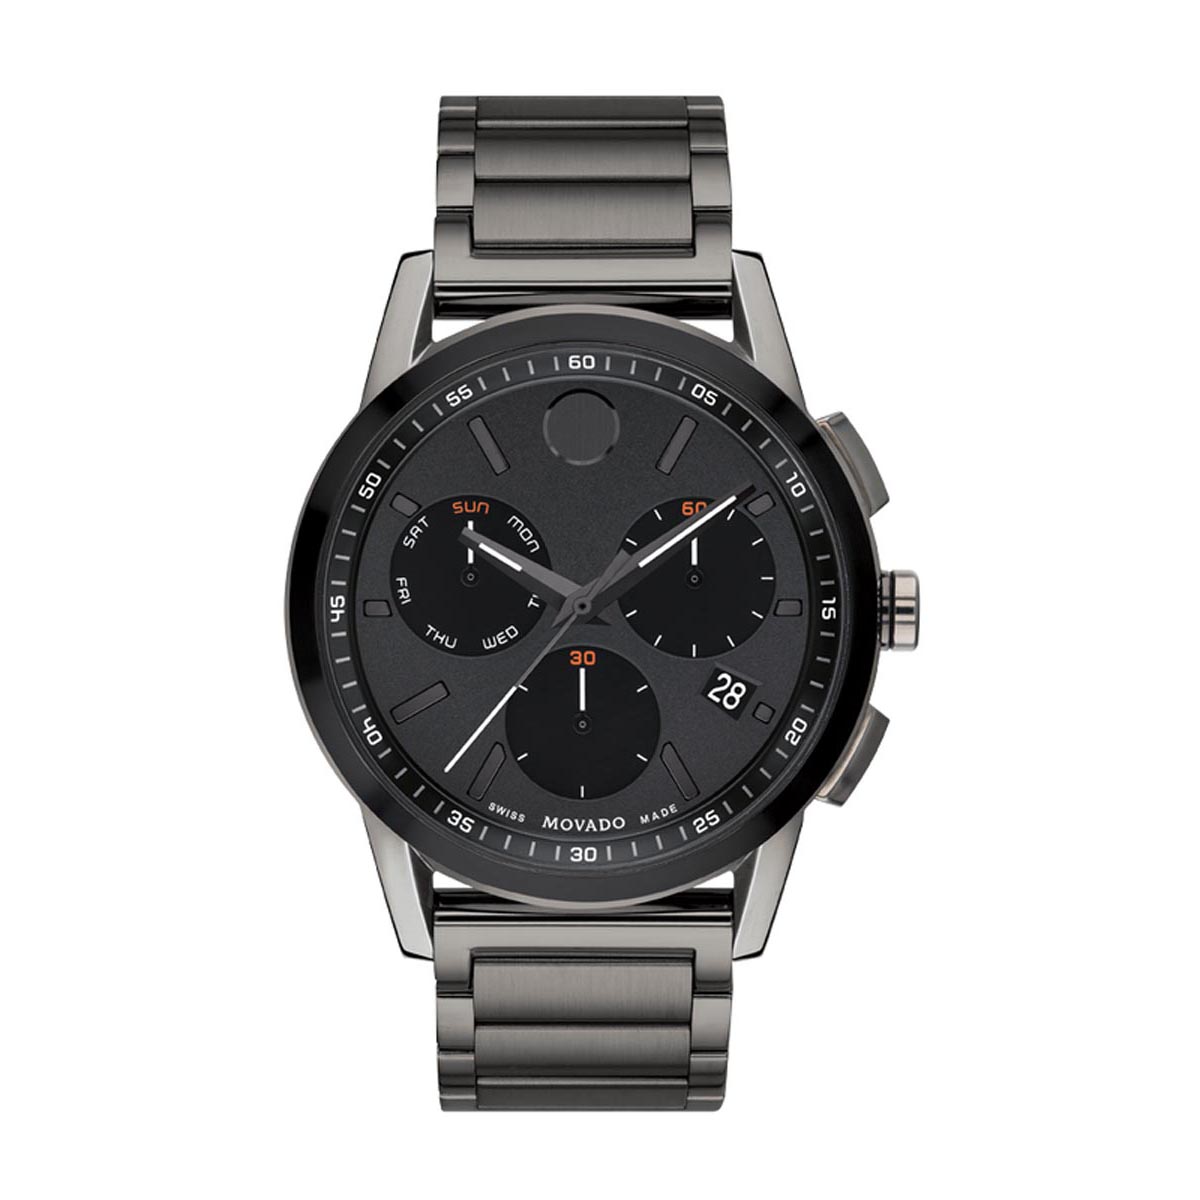 Mens Movado Museum Sport Watch with Black Dial and Gunmetal Ion Stainless Steel Bracelet (Swiss quartz movement)